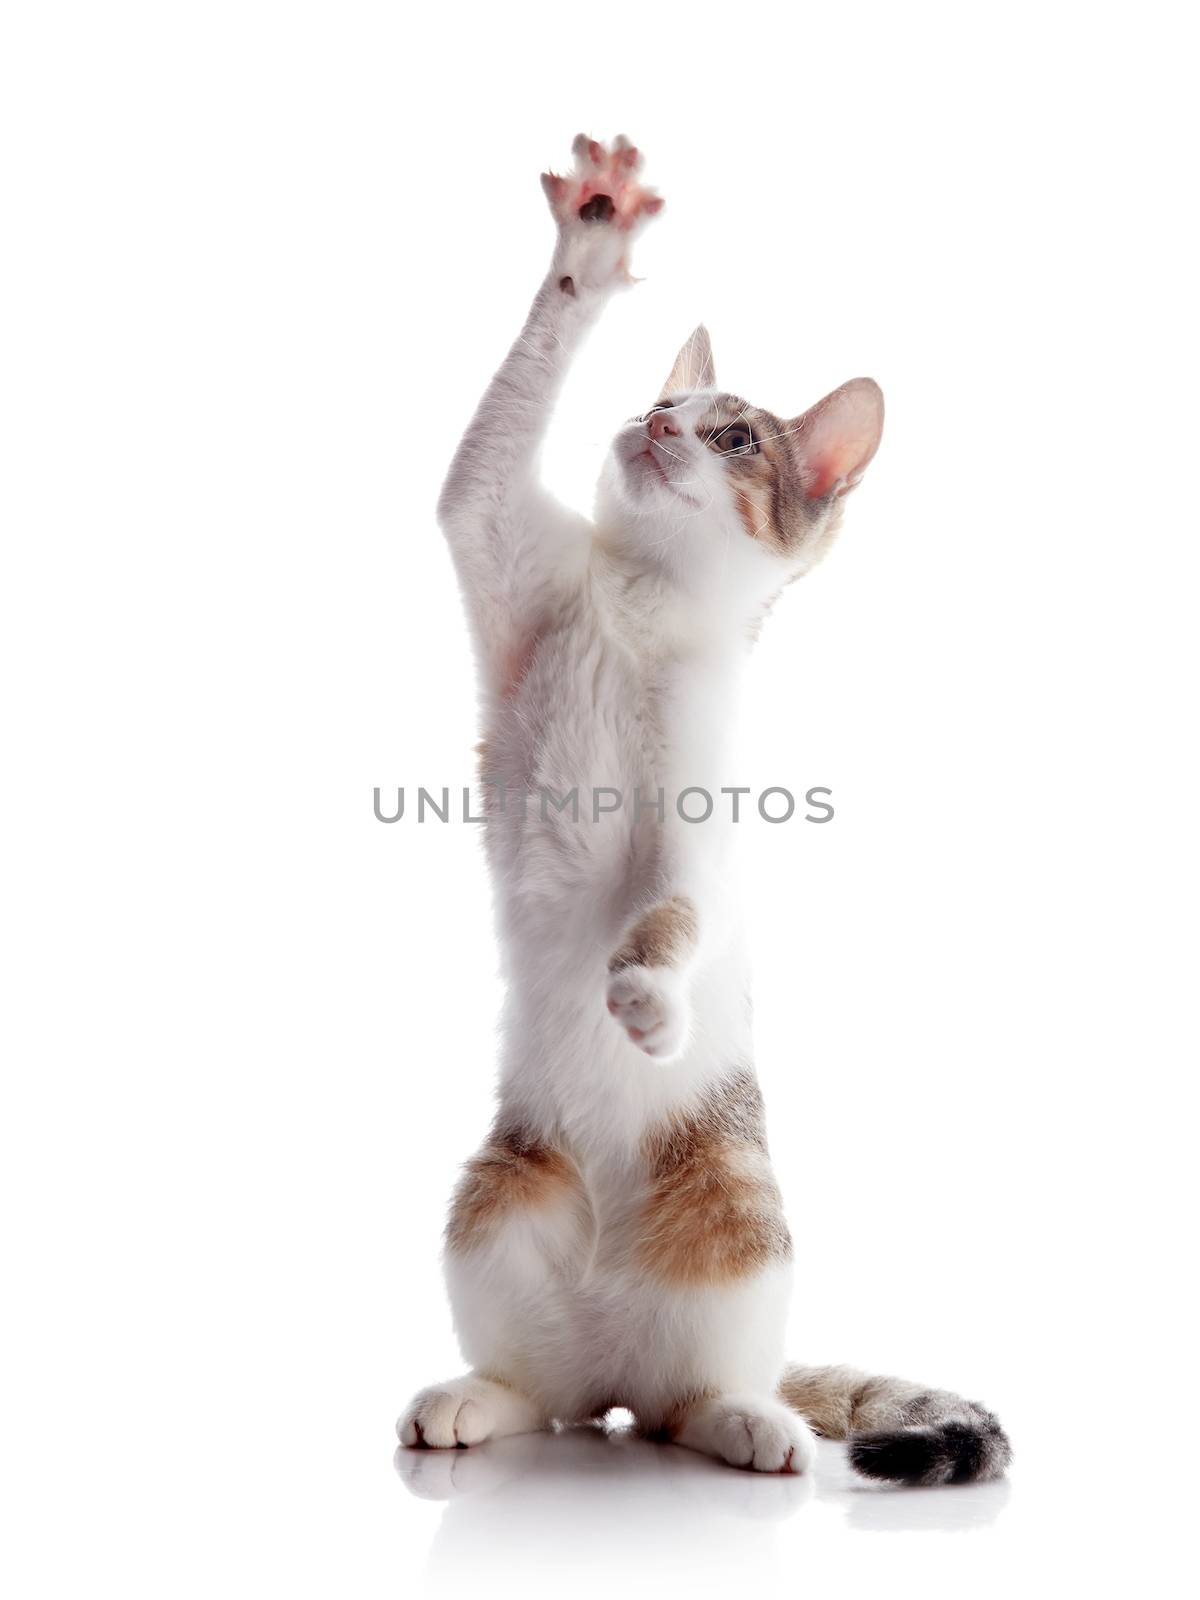 The kitten plays. Multi-colored small kitten. Kitten on a white background. Small predator. Small cat.